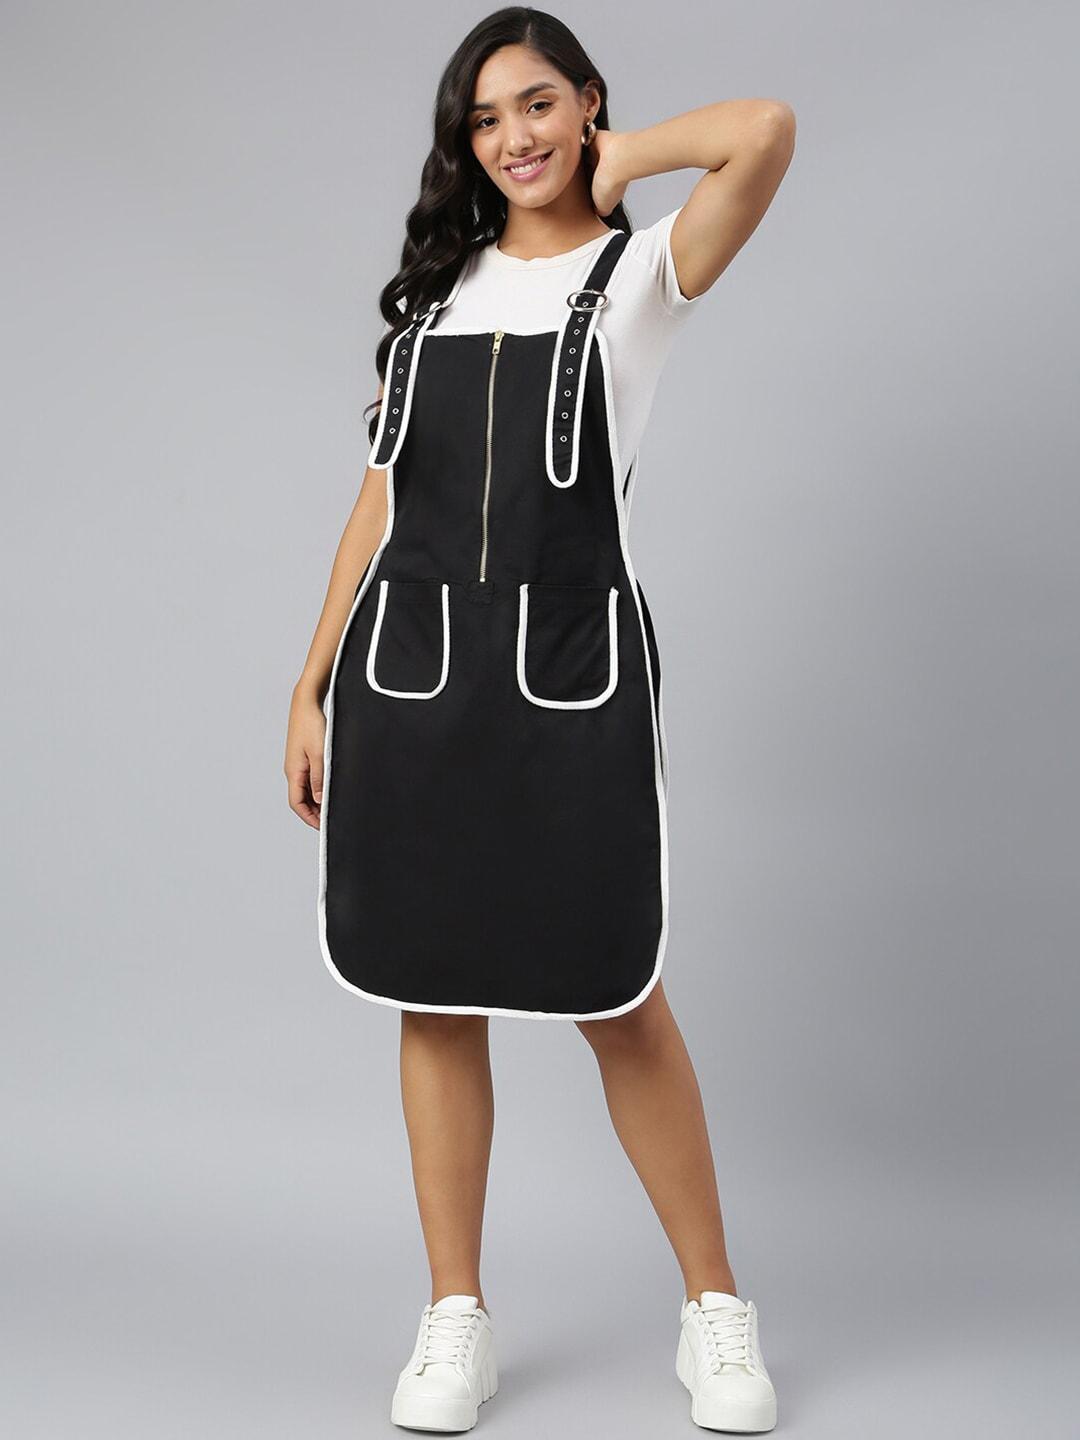 finsbury london black & white cotton pinafore dress with contrast piping